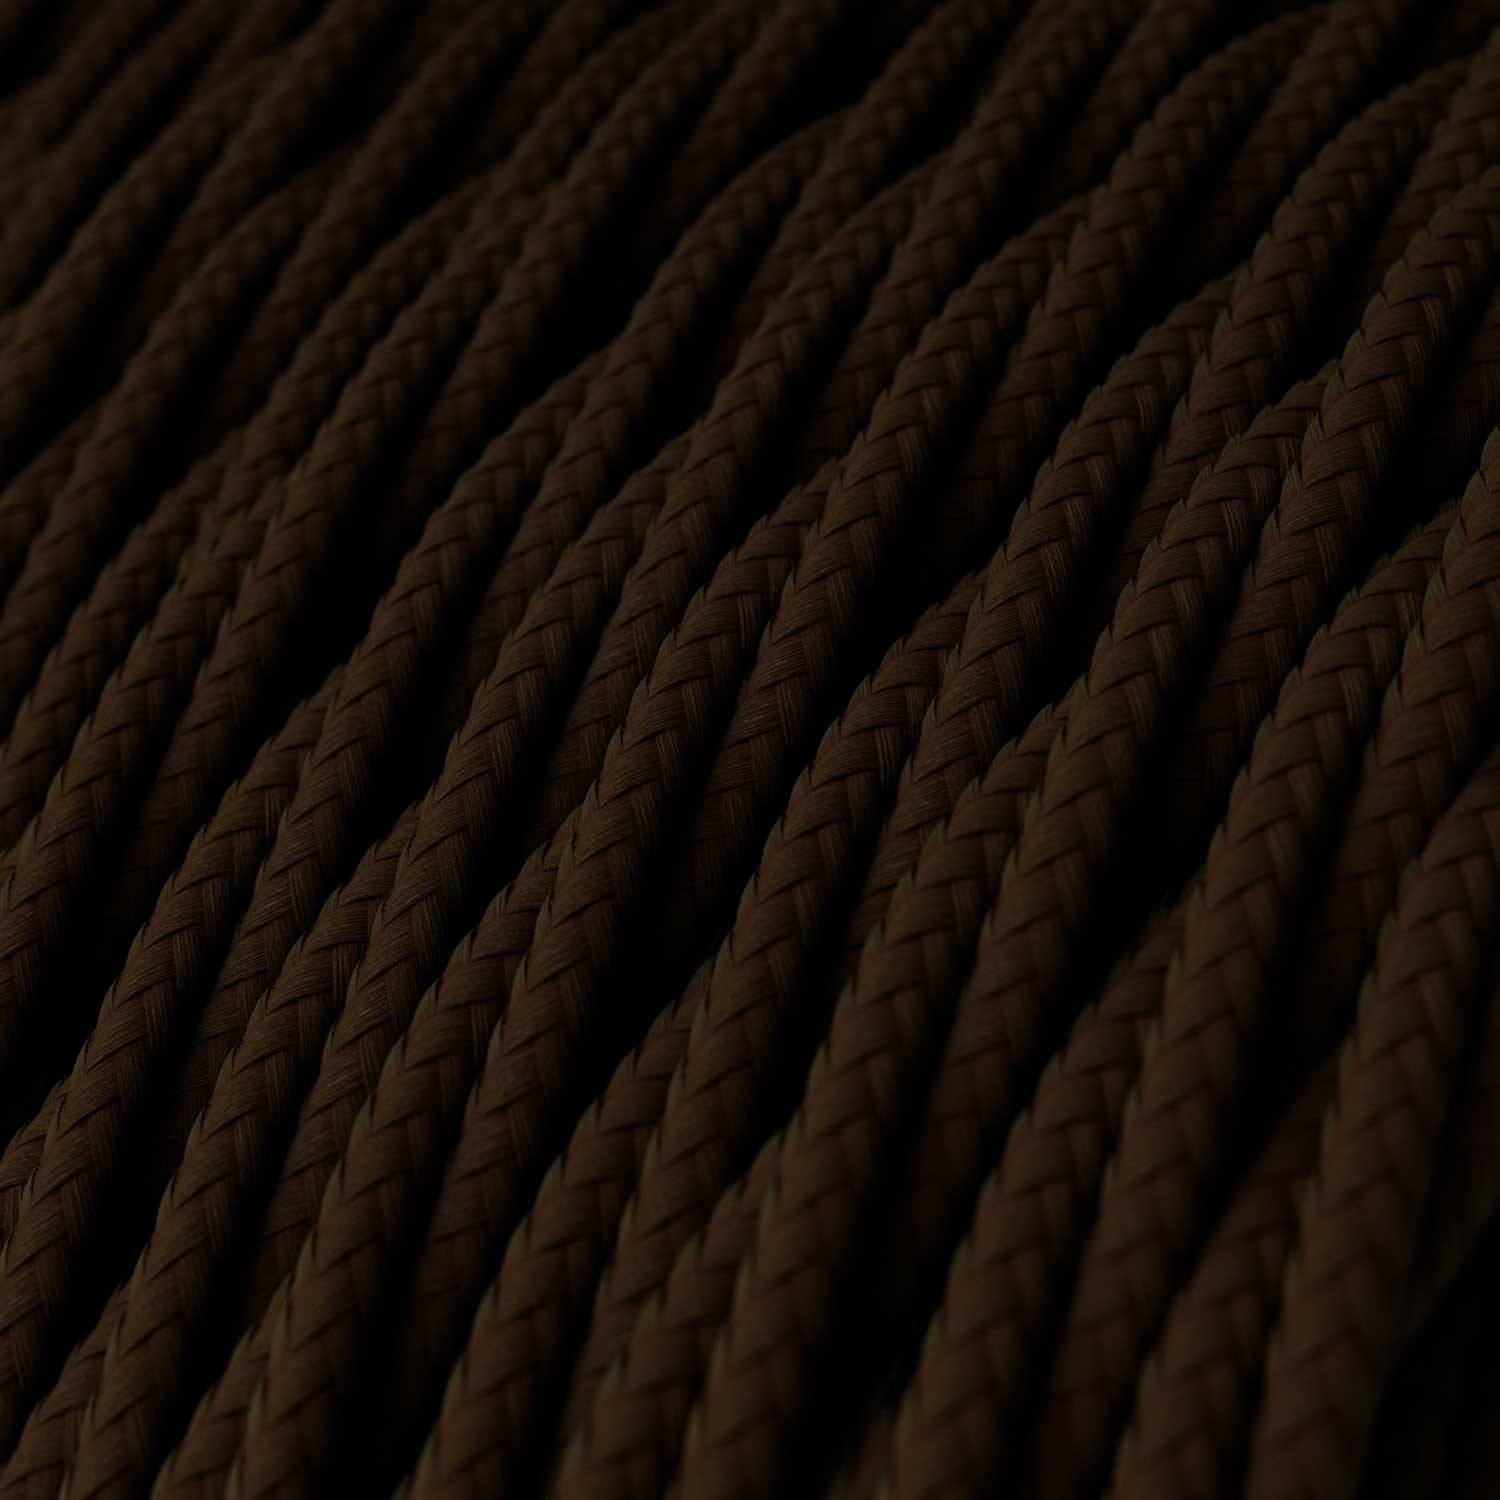 Glossy Espresso Brown Textile Cable - The Original Creative-Cables - TM13 braided 2x0.75mm / 3x0.75mm